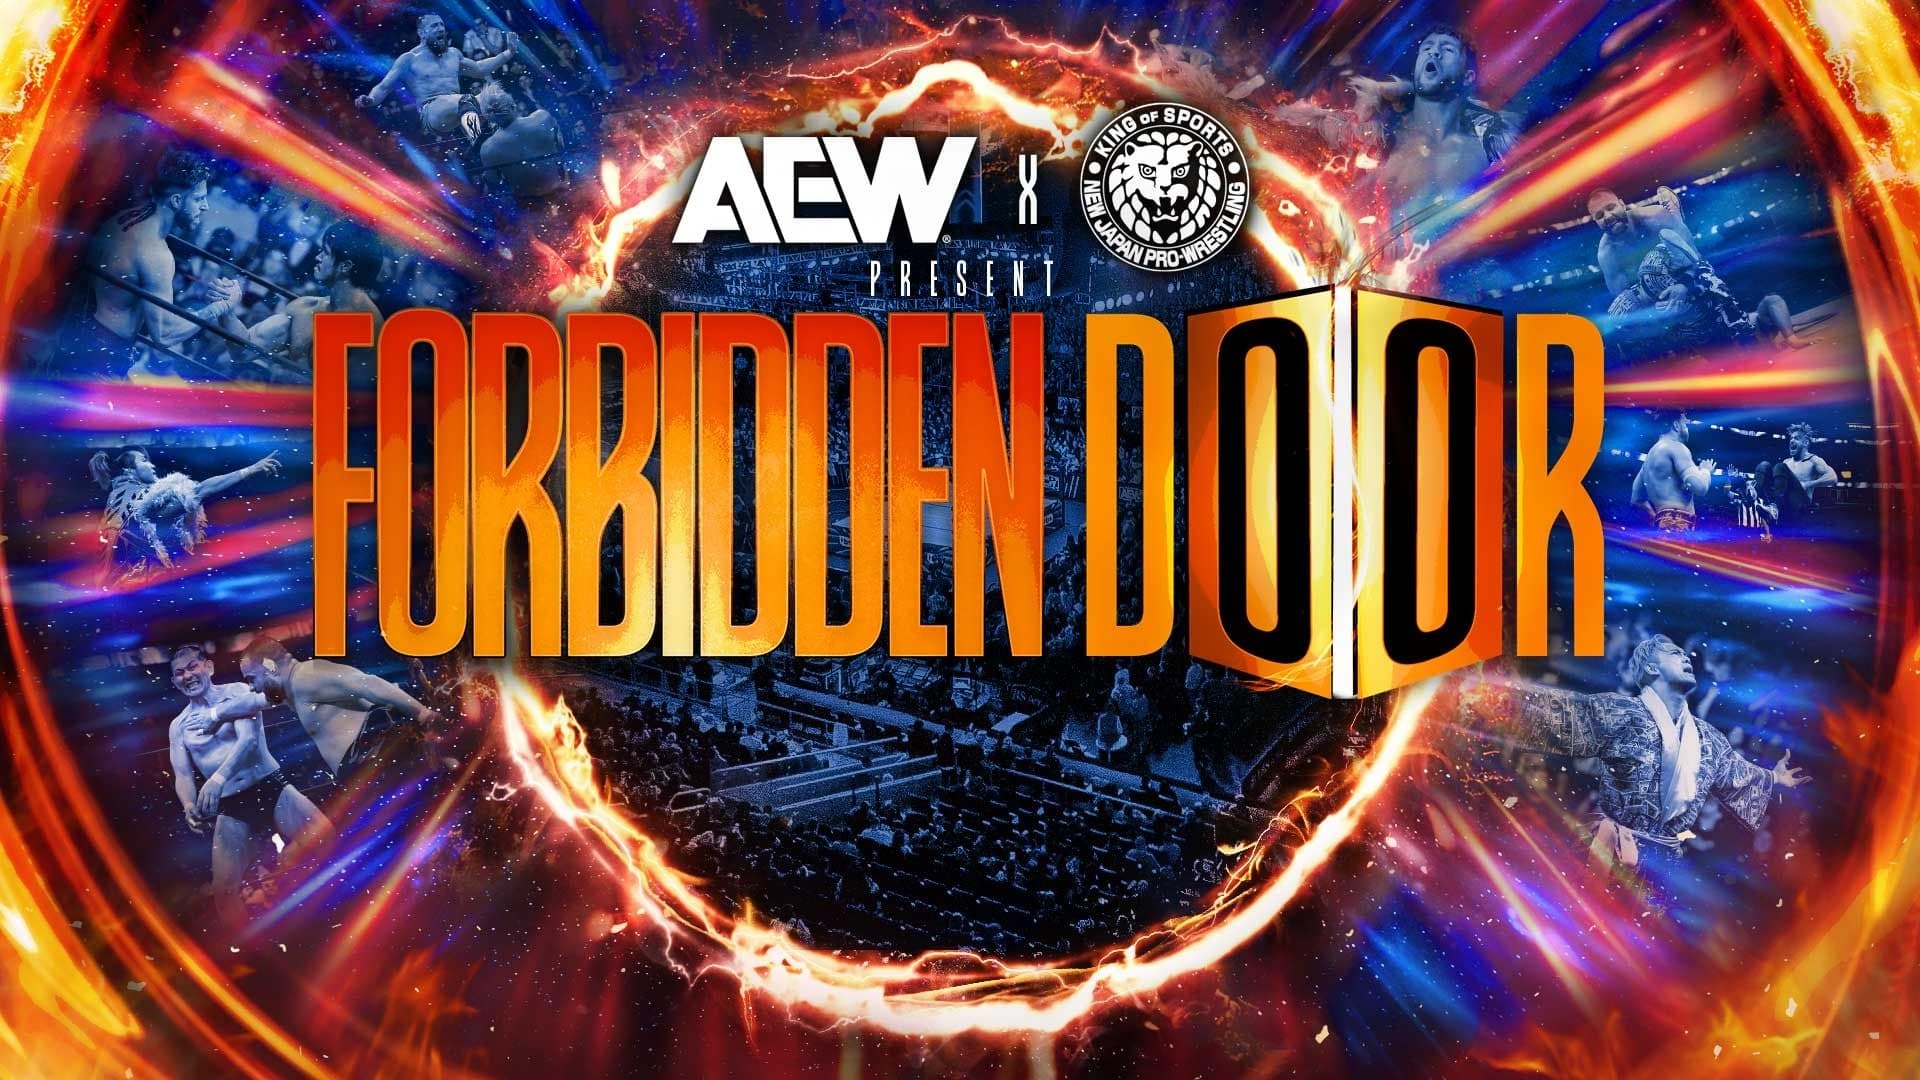 AEW is partnering with New Japan Pro Wrestling for its Forbidden Door pay-per-view.